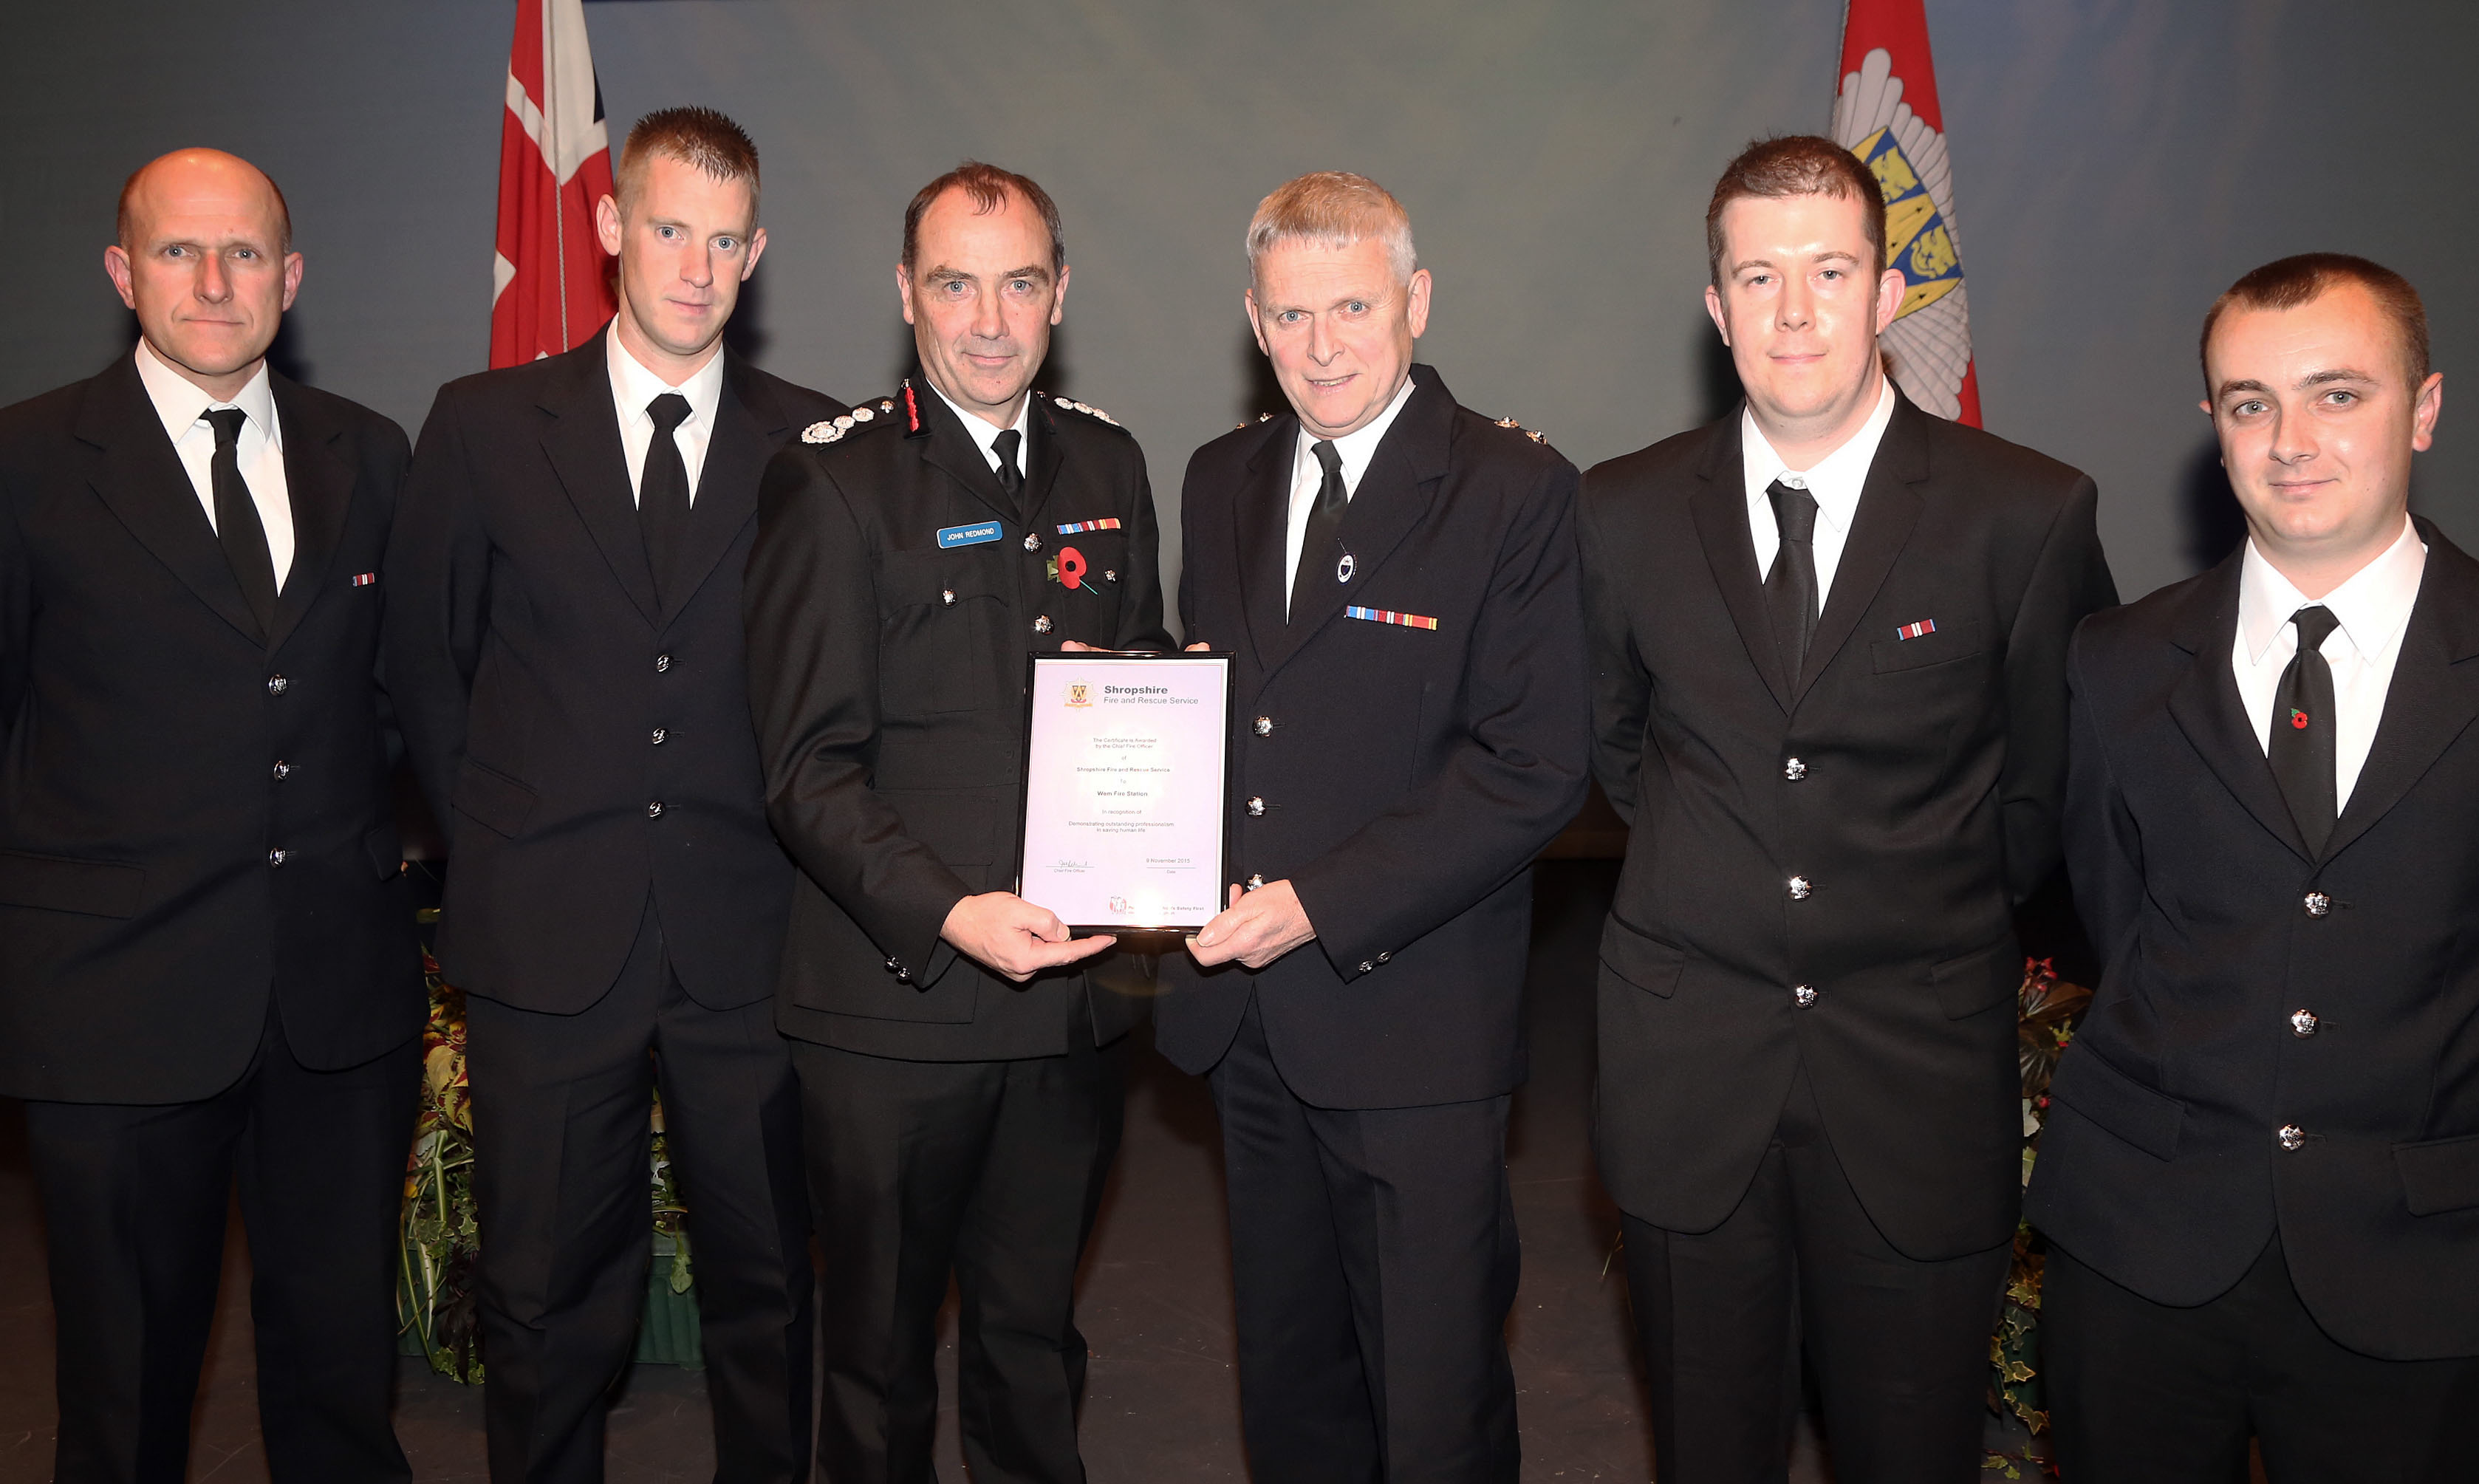 Watch Manager Phil Smith receives the award from Chief Fire Officer John Redmond on behalf of Wem’s fire crew for saving a life. Left to right, John Green, Gary France, John Redmond, Phil Smith, Leon Turner and Darren Jones.  Vic Young (not pictured) was also involved in the rescue.